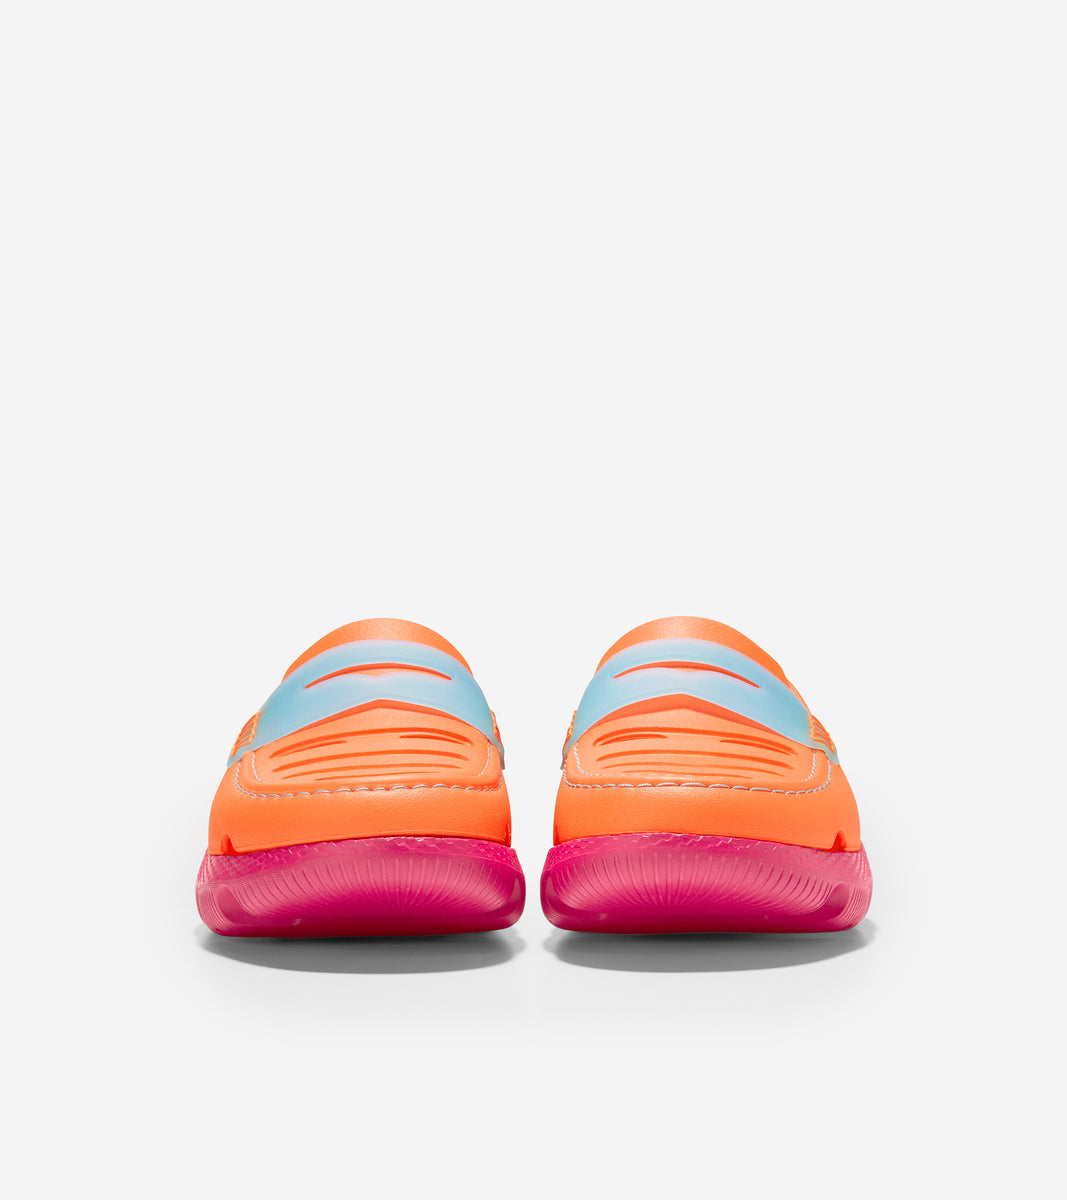 ColeHaan-4.ZEROGRAND All-Day Loafer-w23355-Shocking Orange-Bright Berry